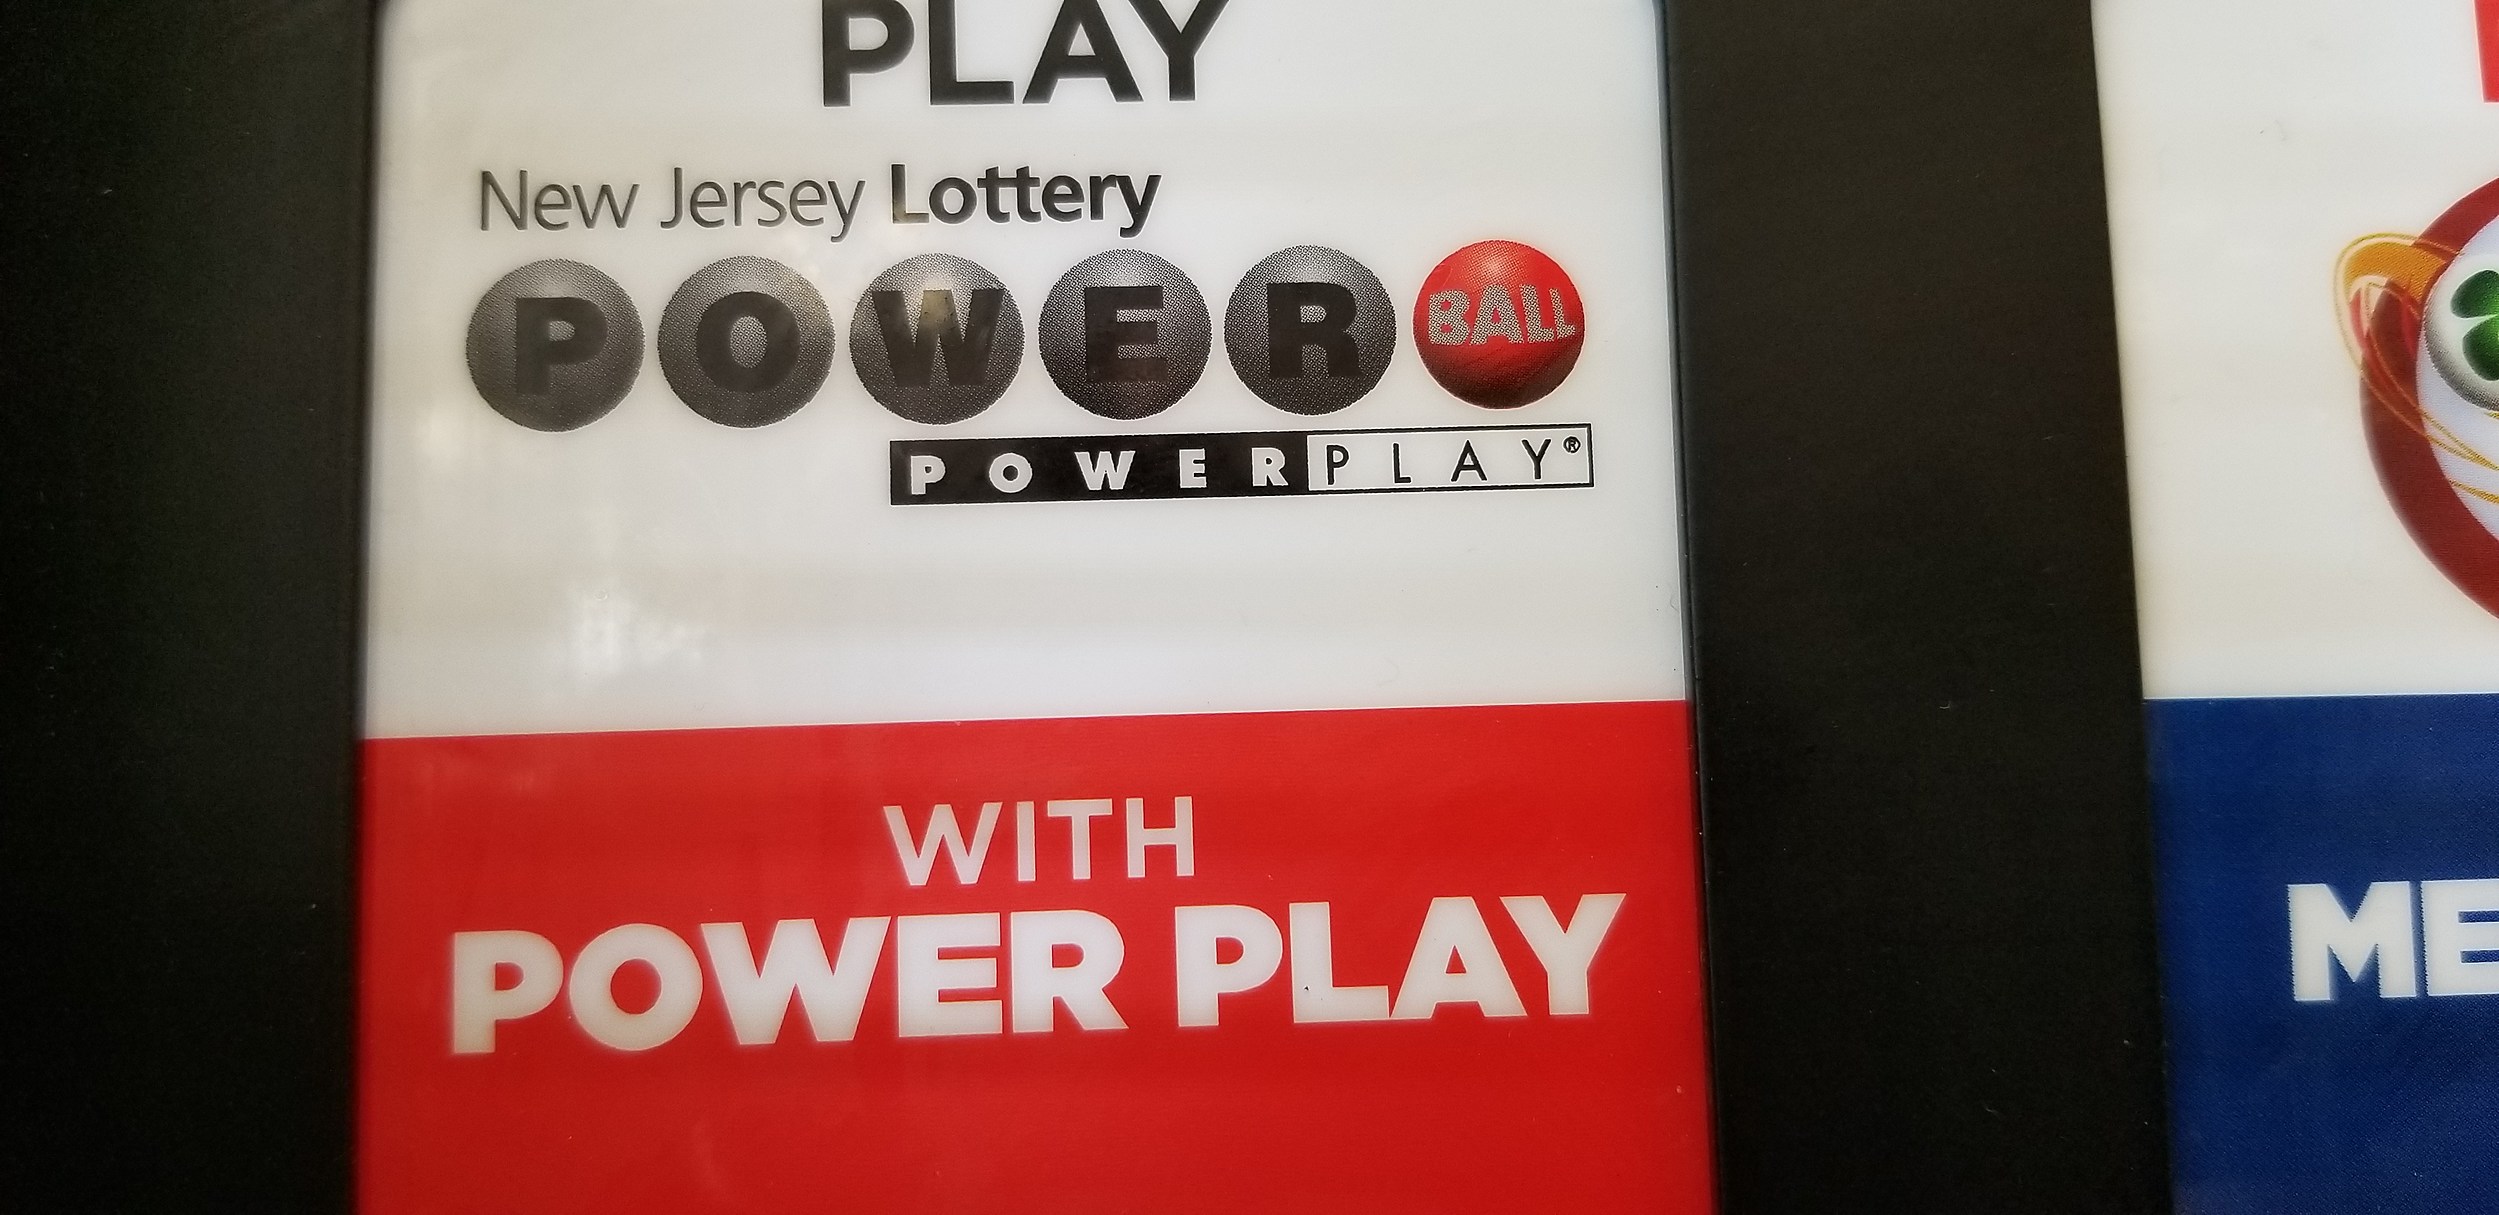 what is the current powerball jackpot